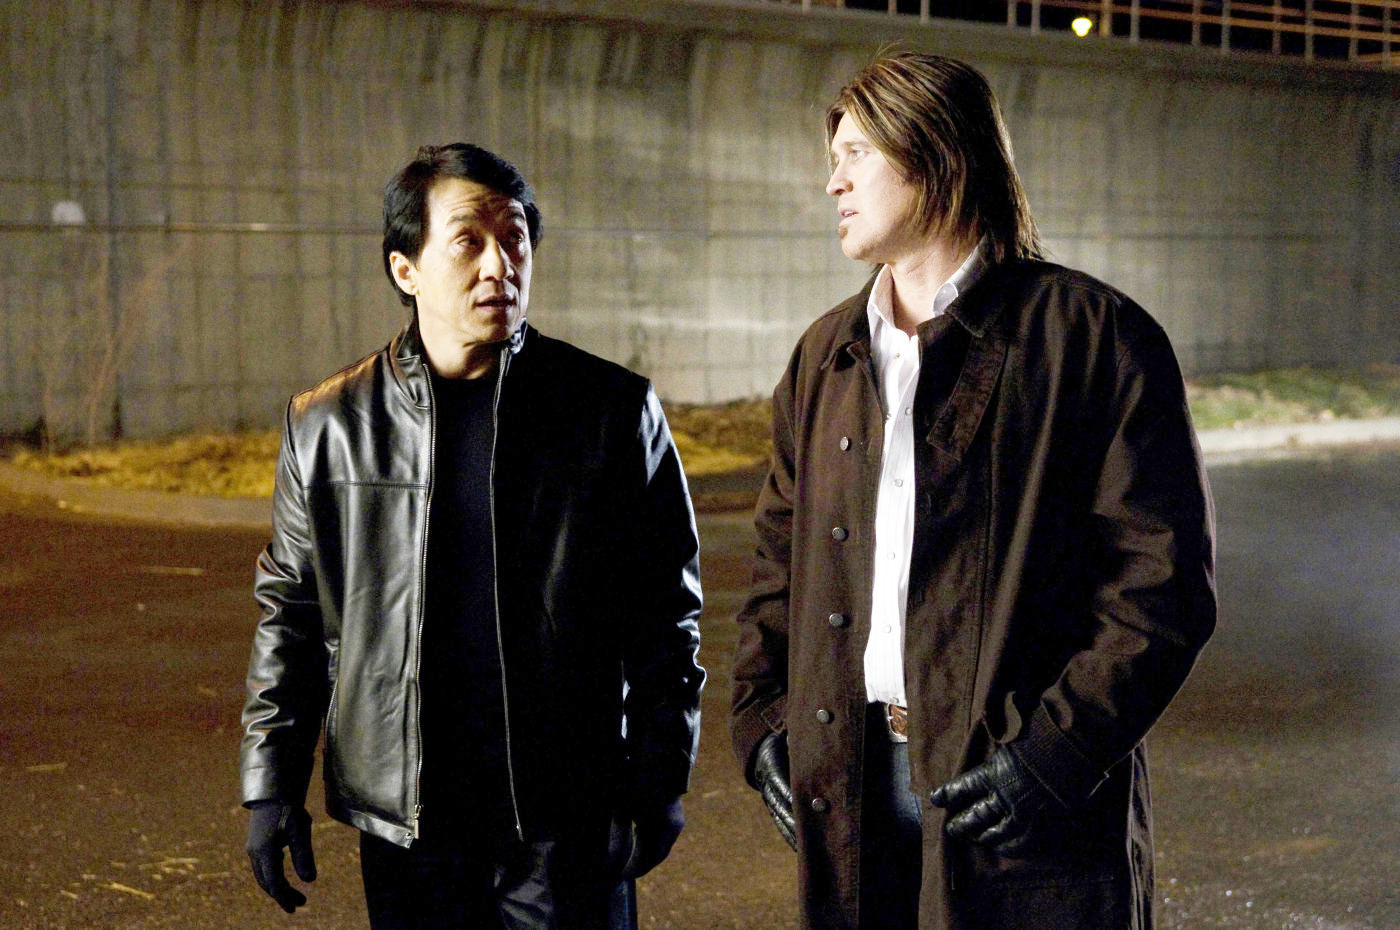 Jackie Chan stars as Bob Ho and Billy Ray Cyrus stars as Colton James in Lionsgate Films' The Spy Next Door (2010)